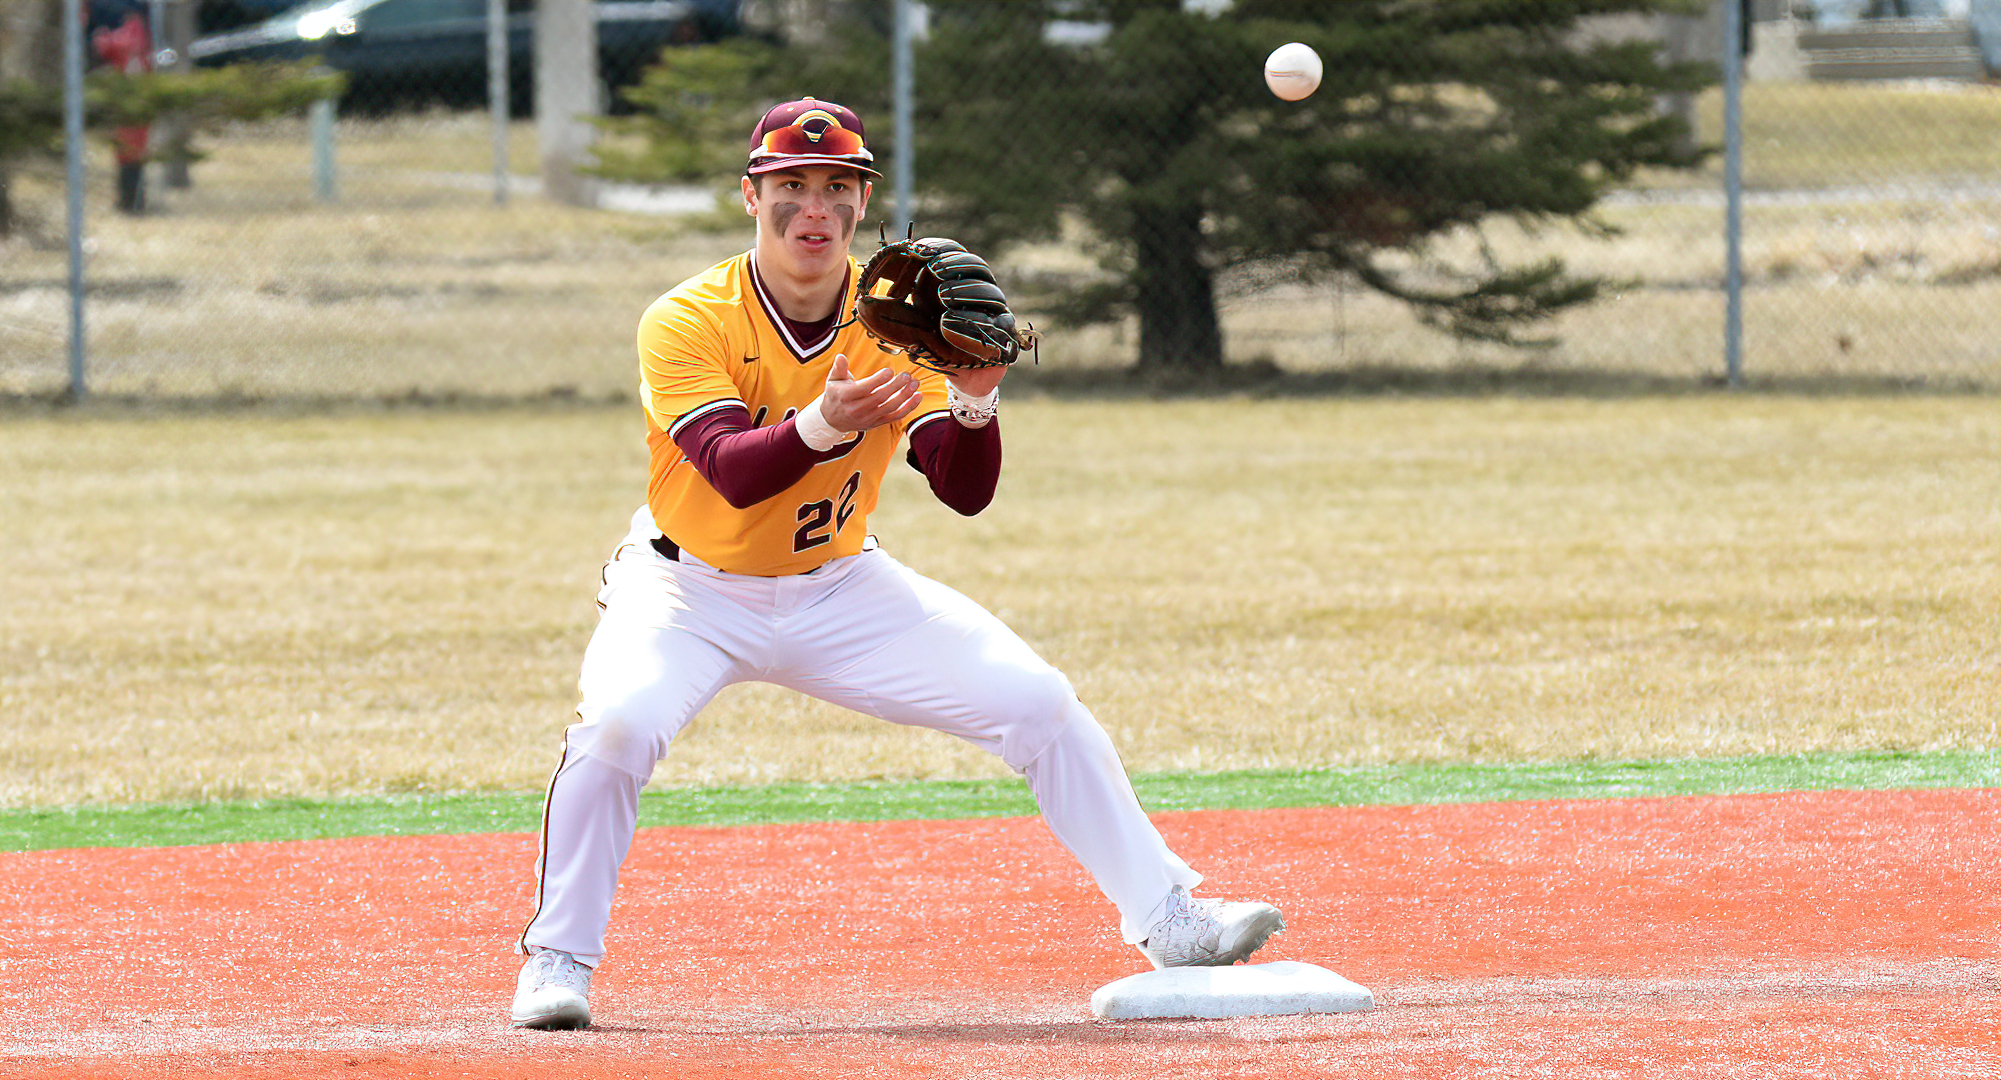 Jake Christianson had multiple hits in both games of the Cobbers' DH at St. Olaf. He went 5-for-8 on the day and is hitting .614 in the last five games.